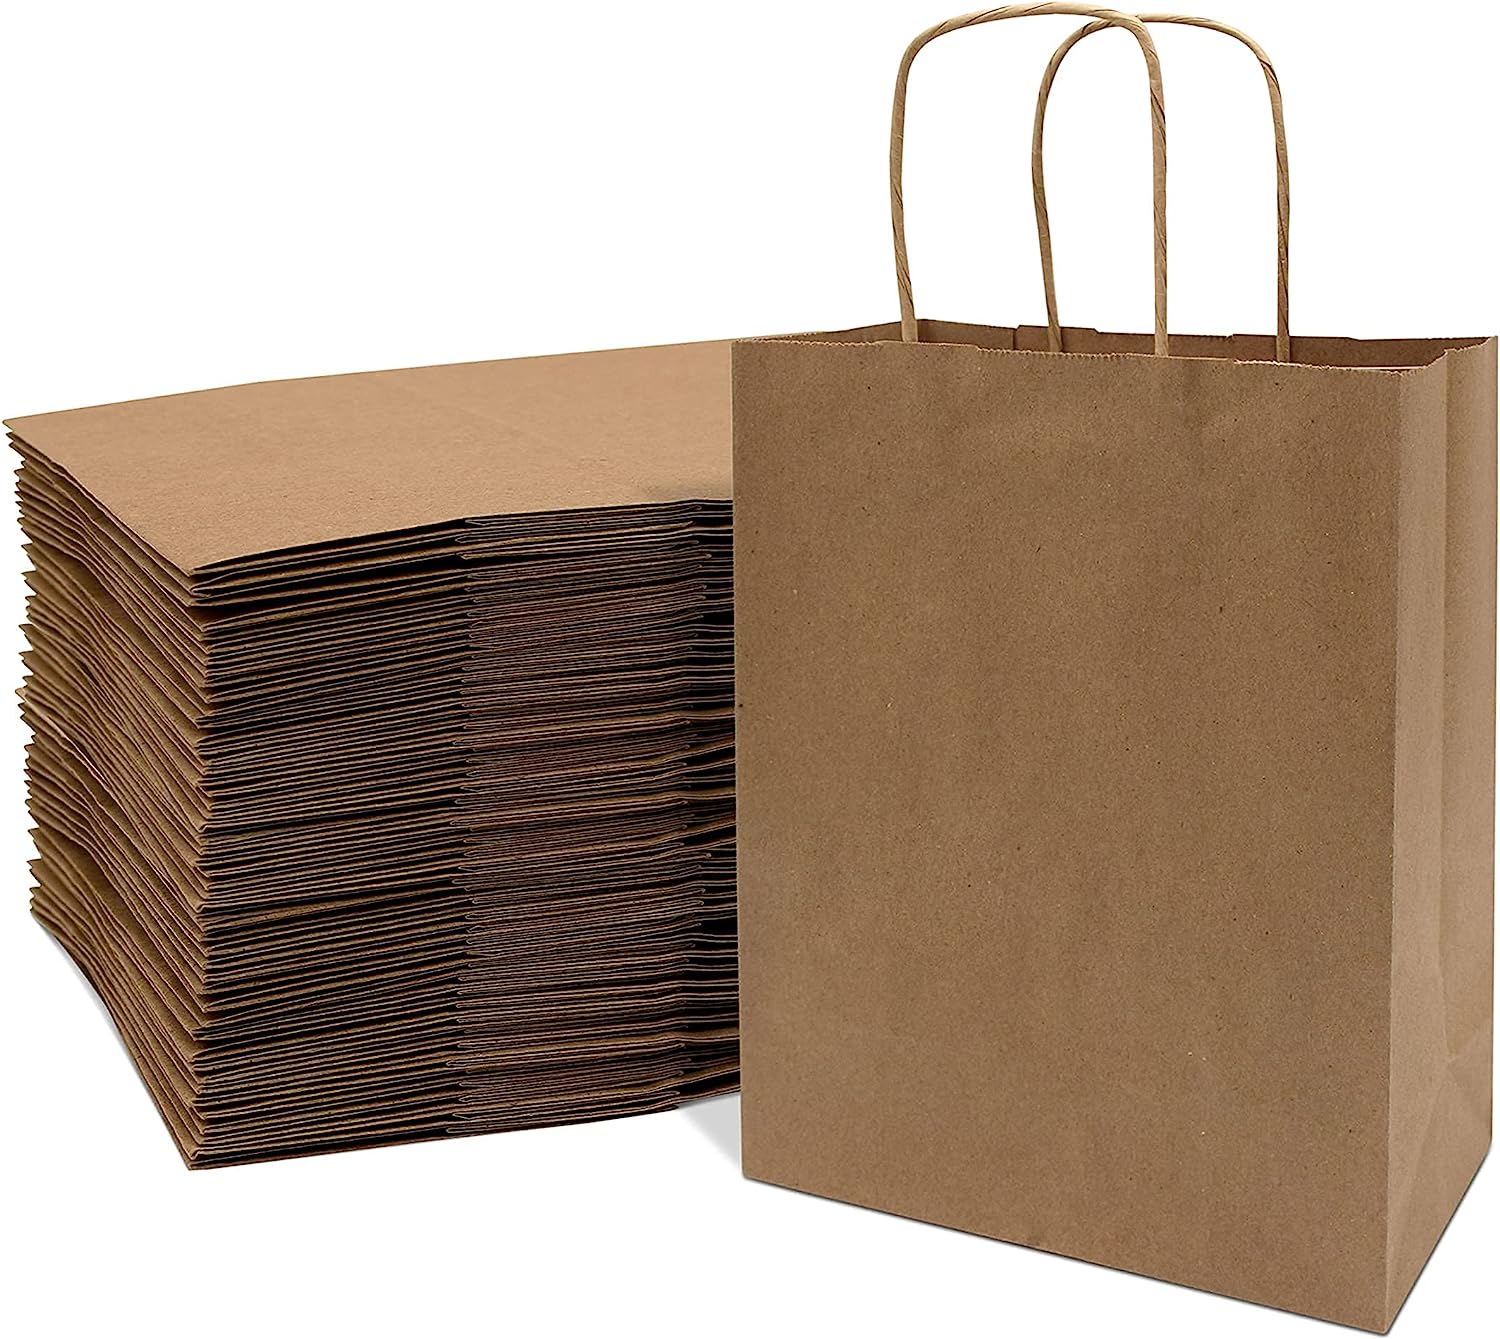 The environmentals Paper bags